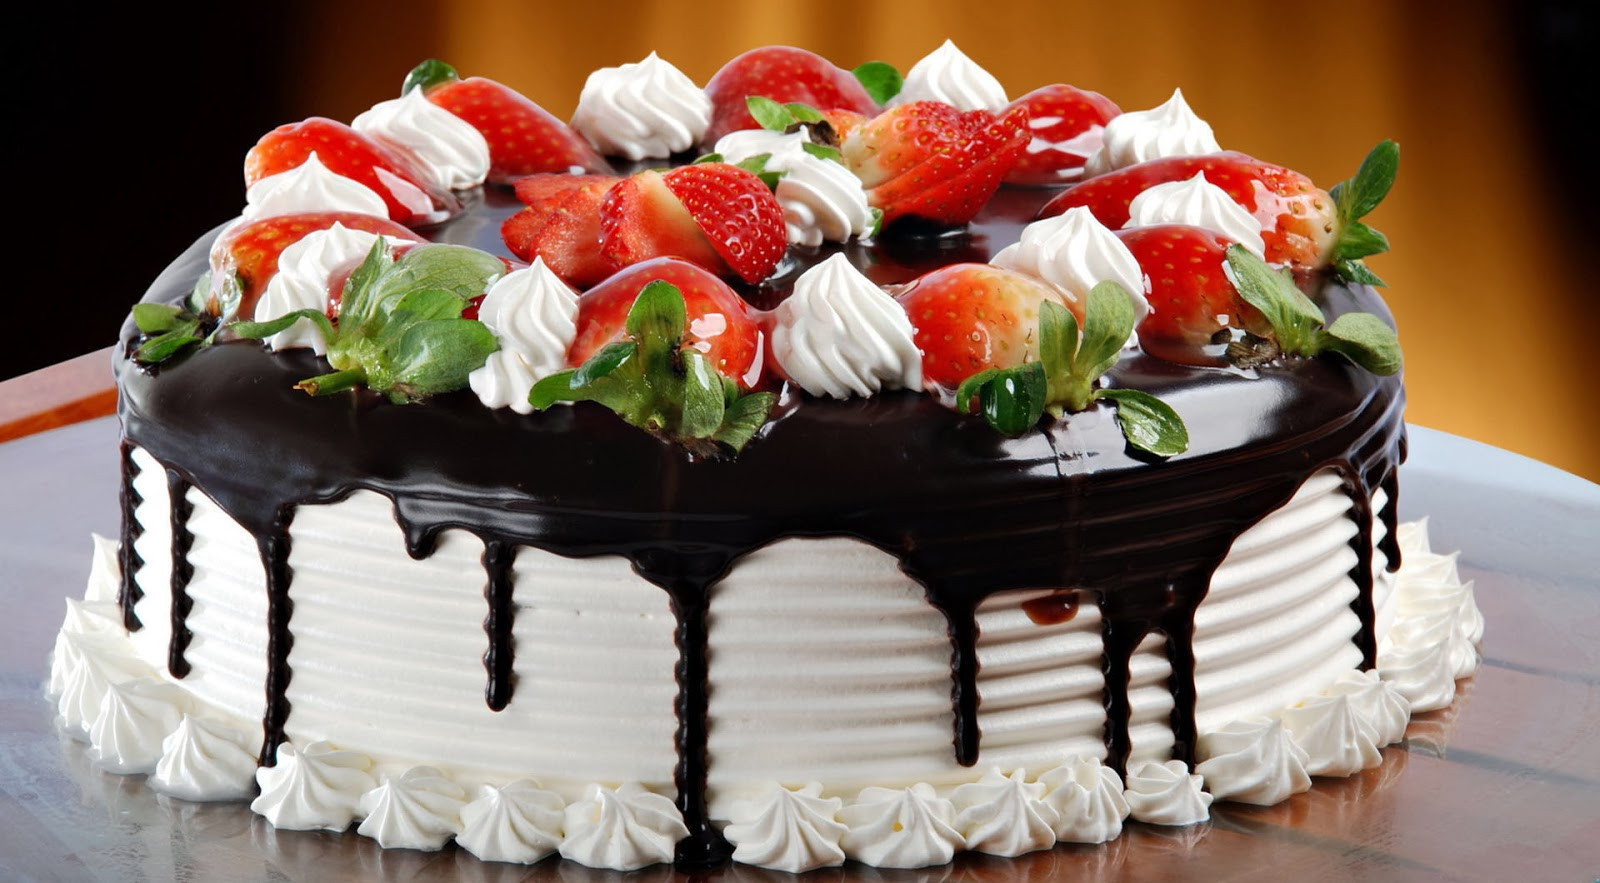 Pictures Of Happy Birthday Cakes
 Lovable Happy Birthday Greetings free